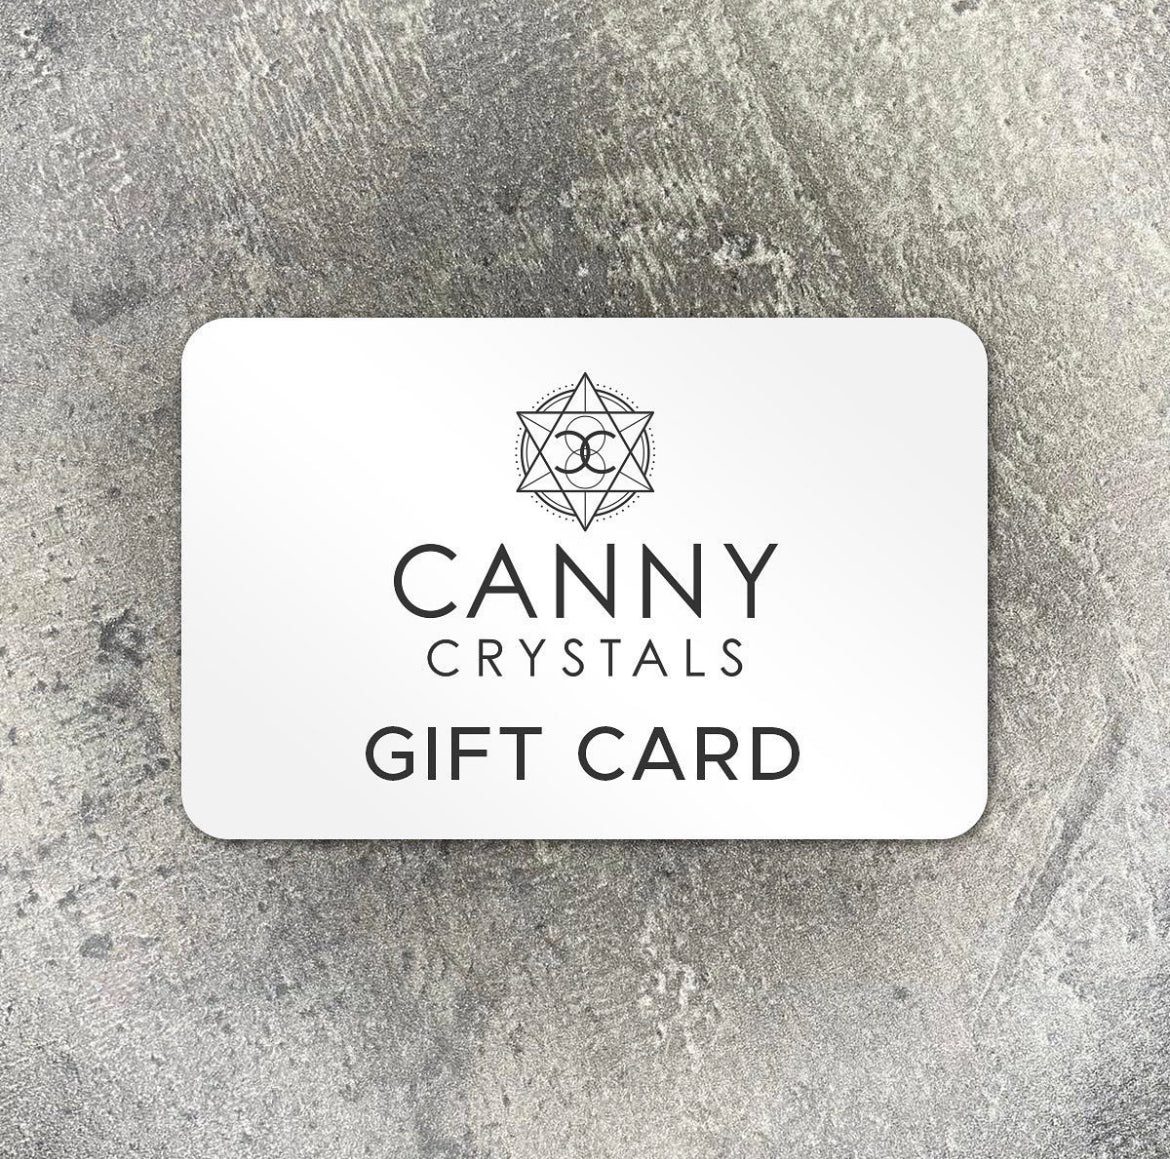 Canny Crystals Gift Card